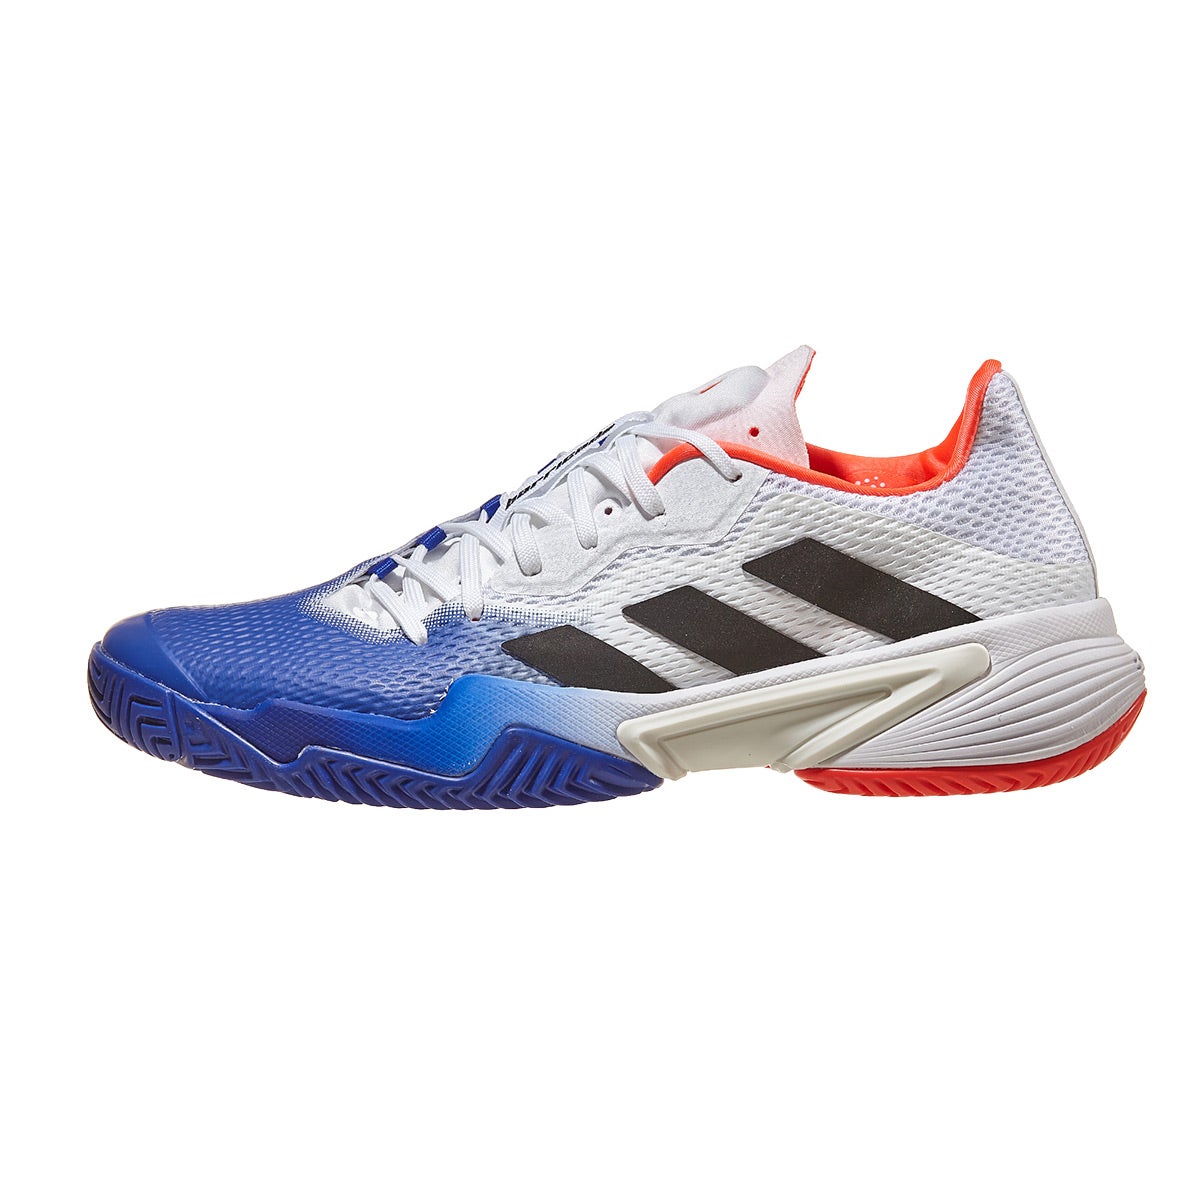 adidas Barricade Blue/Black/Red Men's Shoes 360° View - Racquetball ...